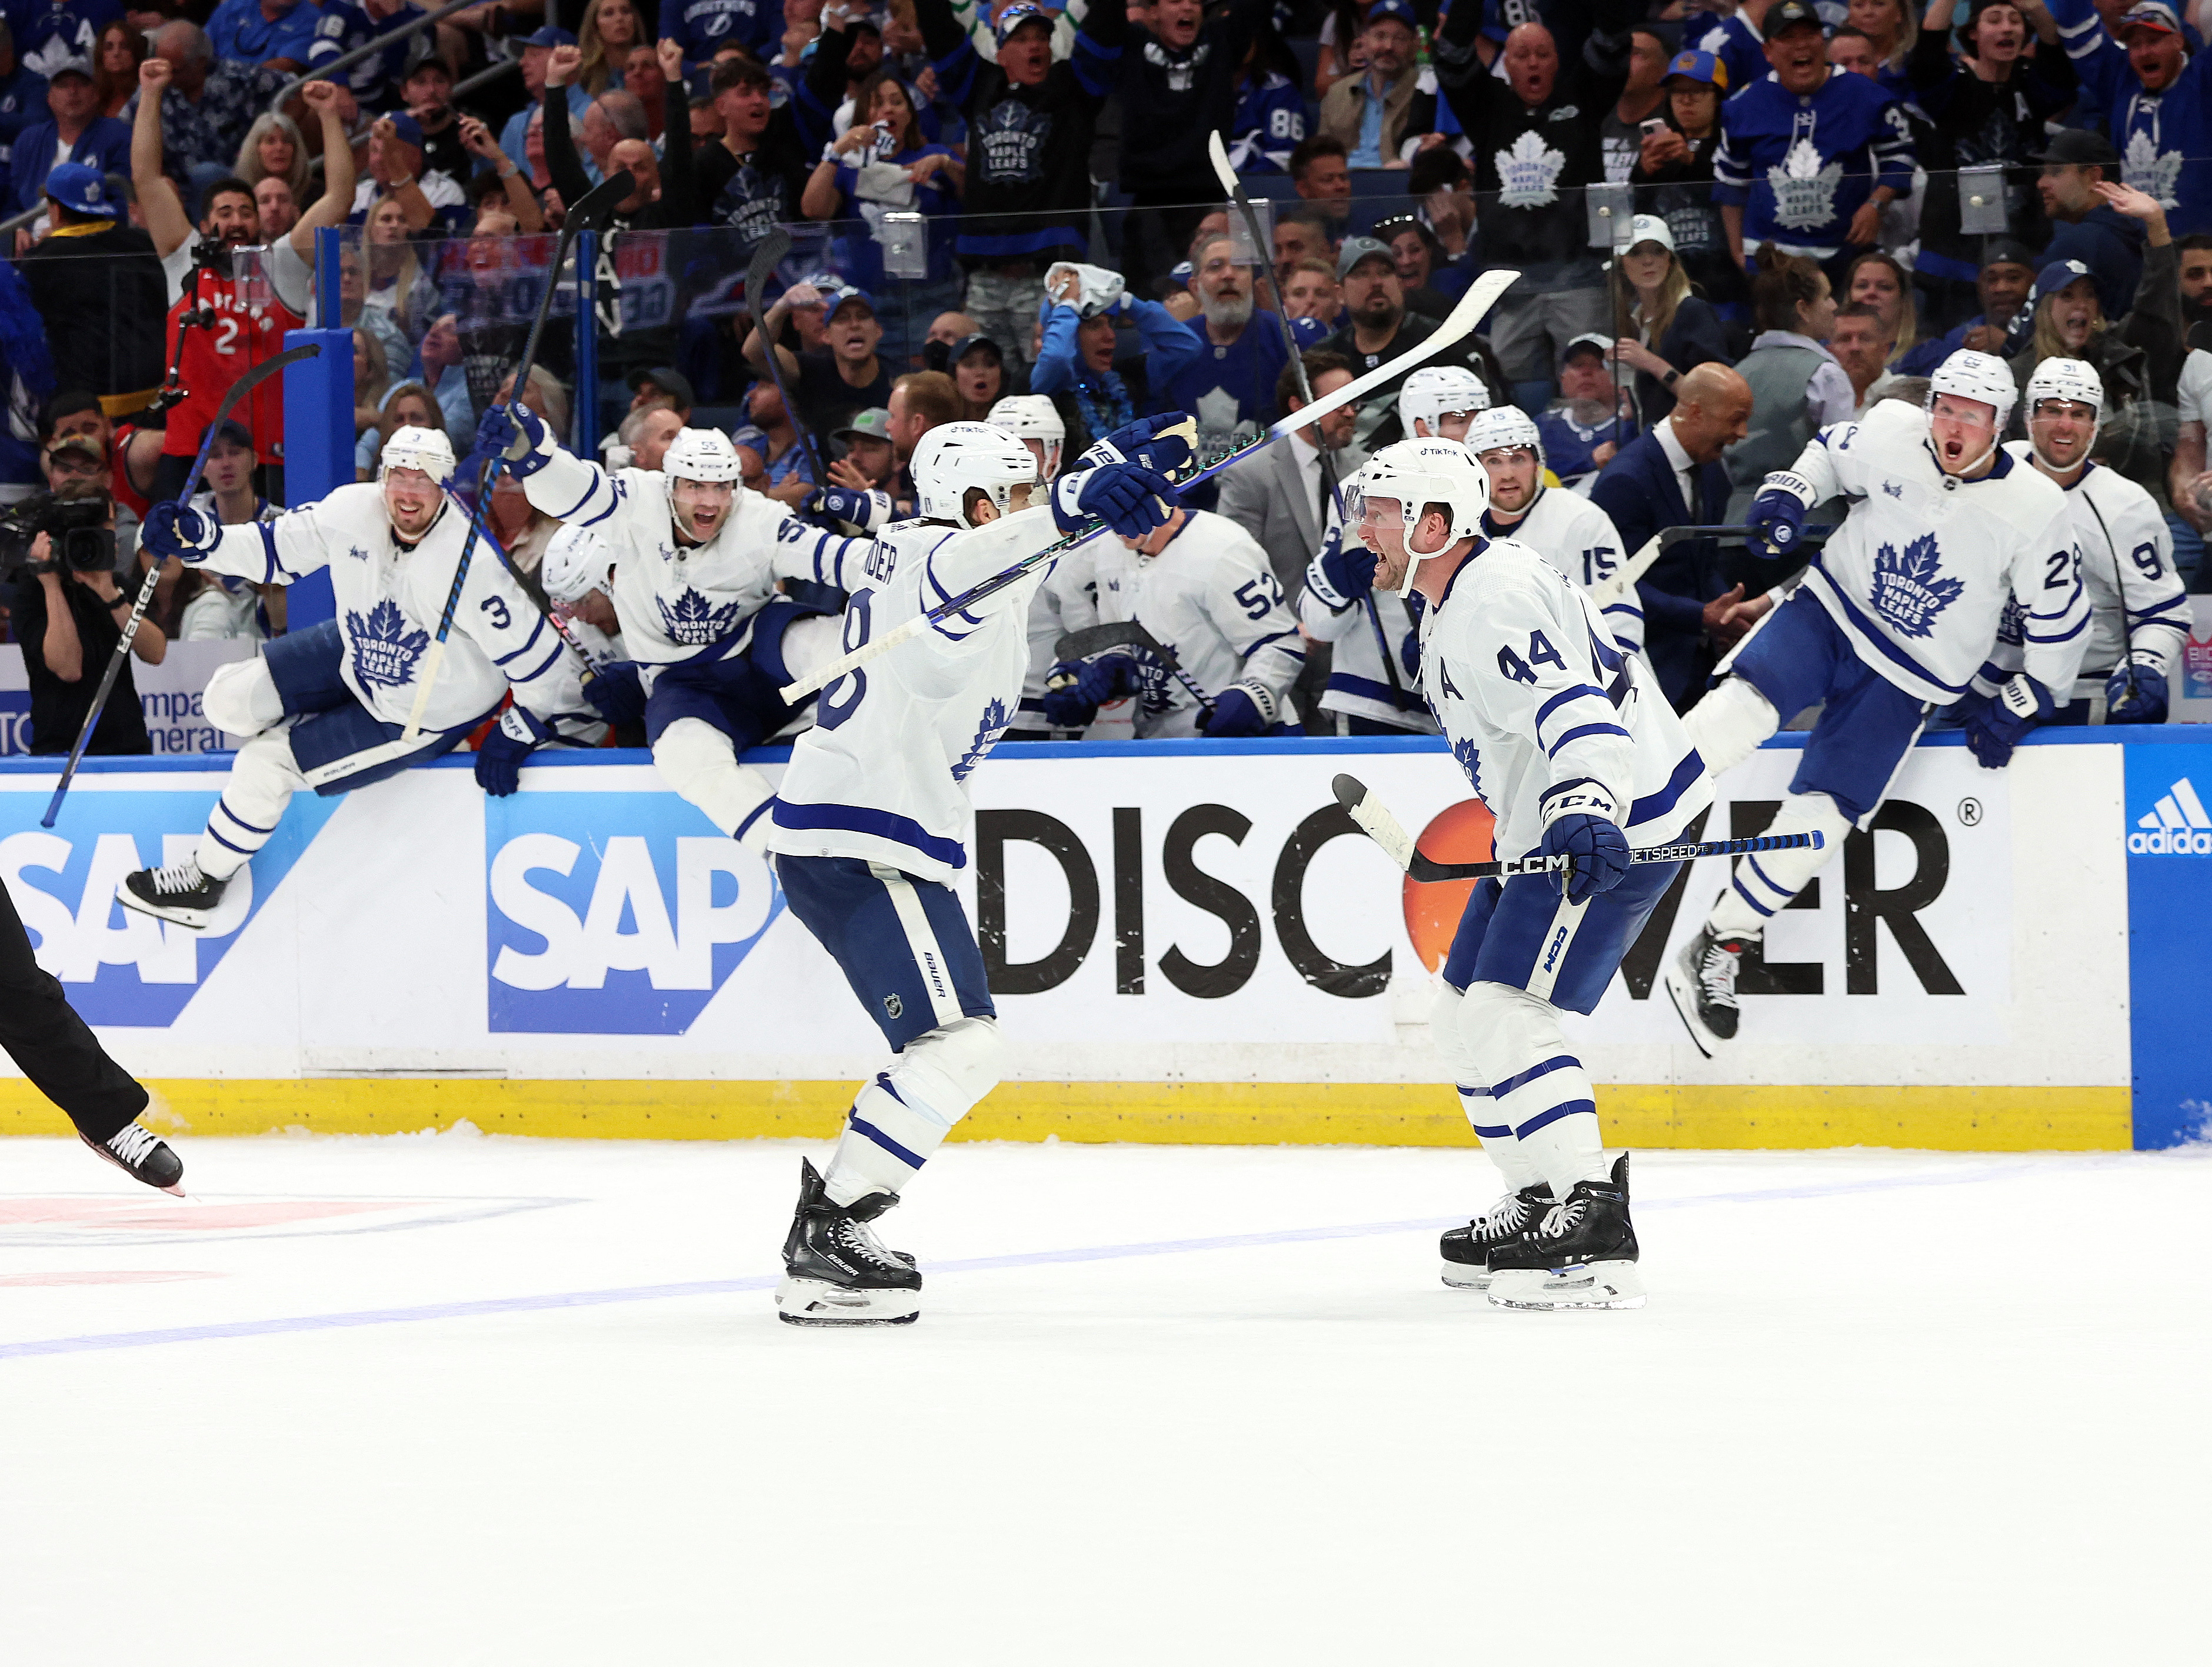 Rielly's OT winner gives Maple Leafs series lead over Lightning